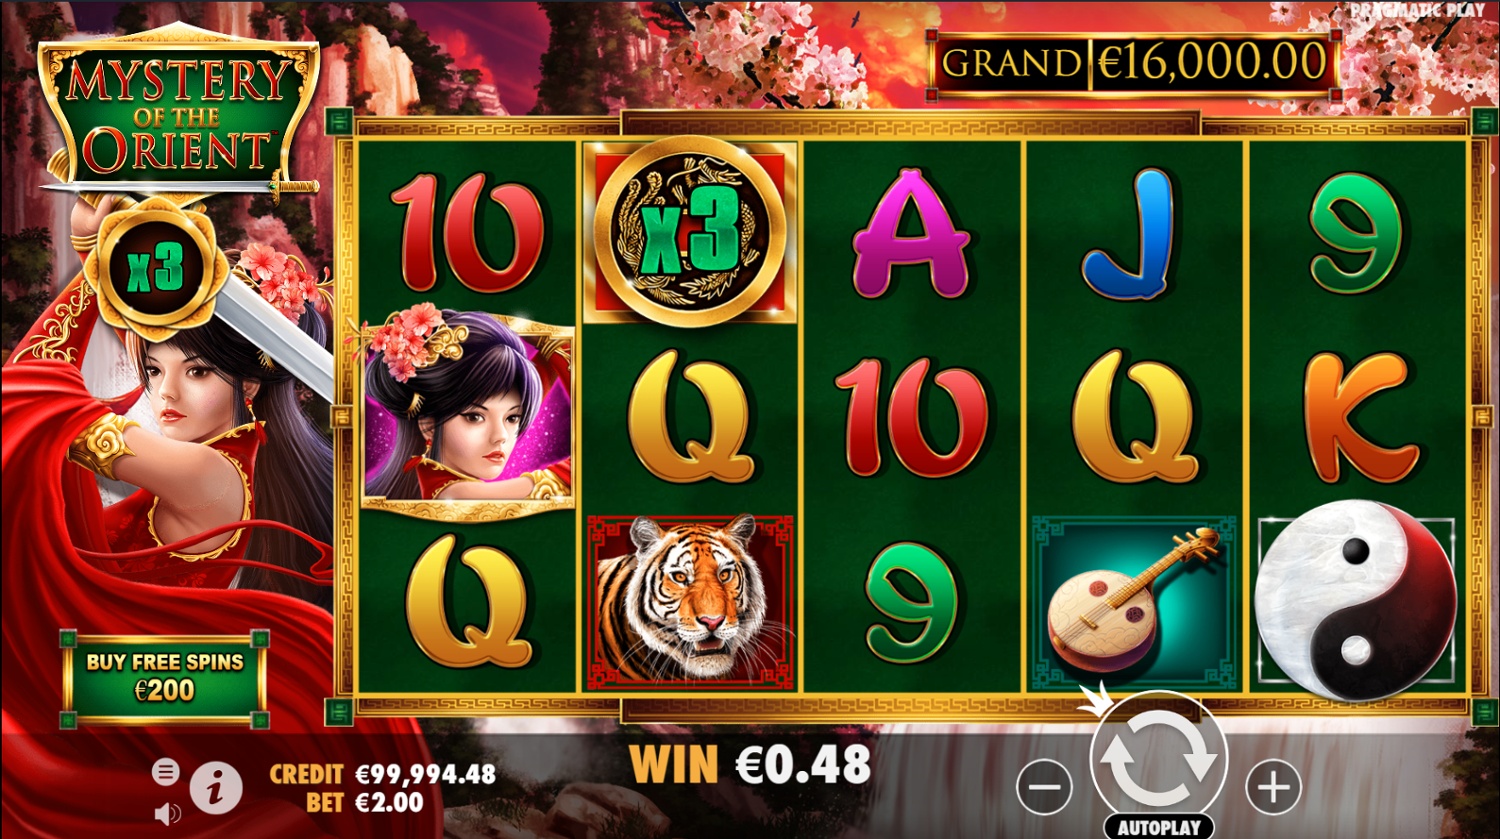 Mystery of the Orient pragmatic play slot online demo